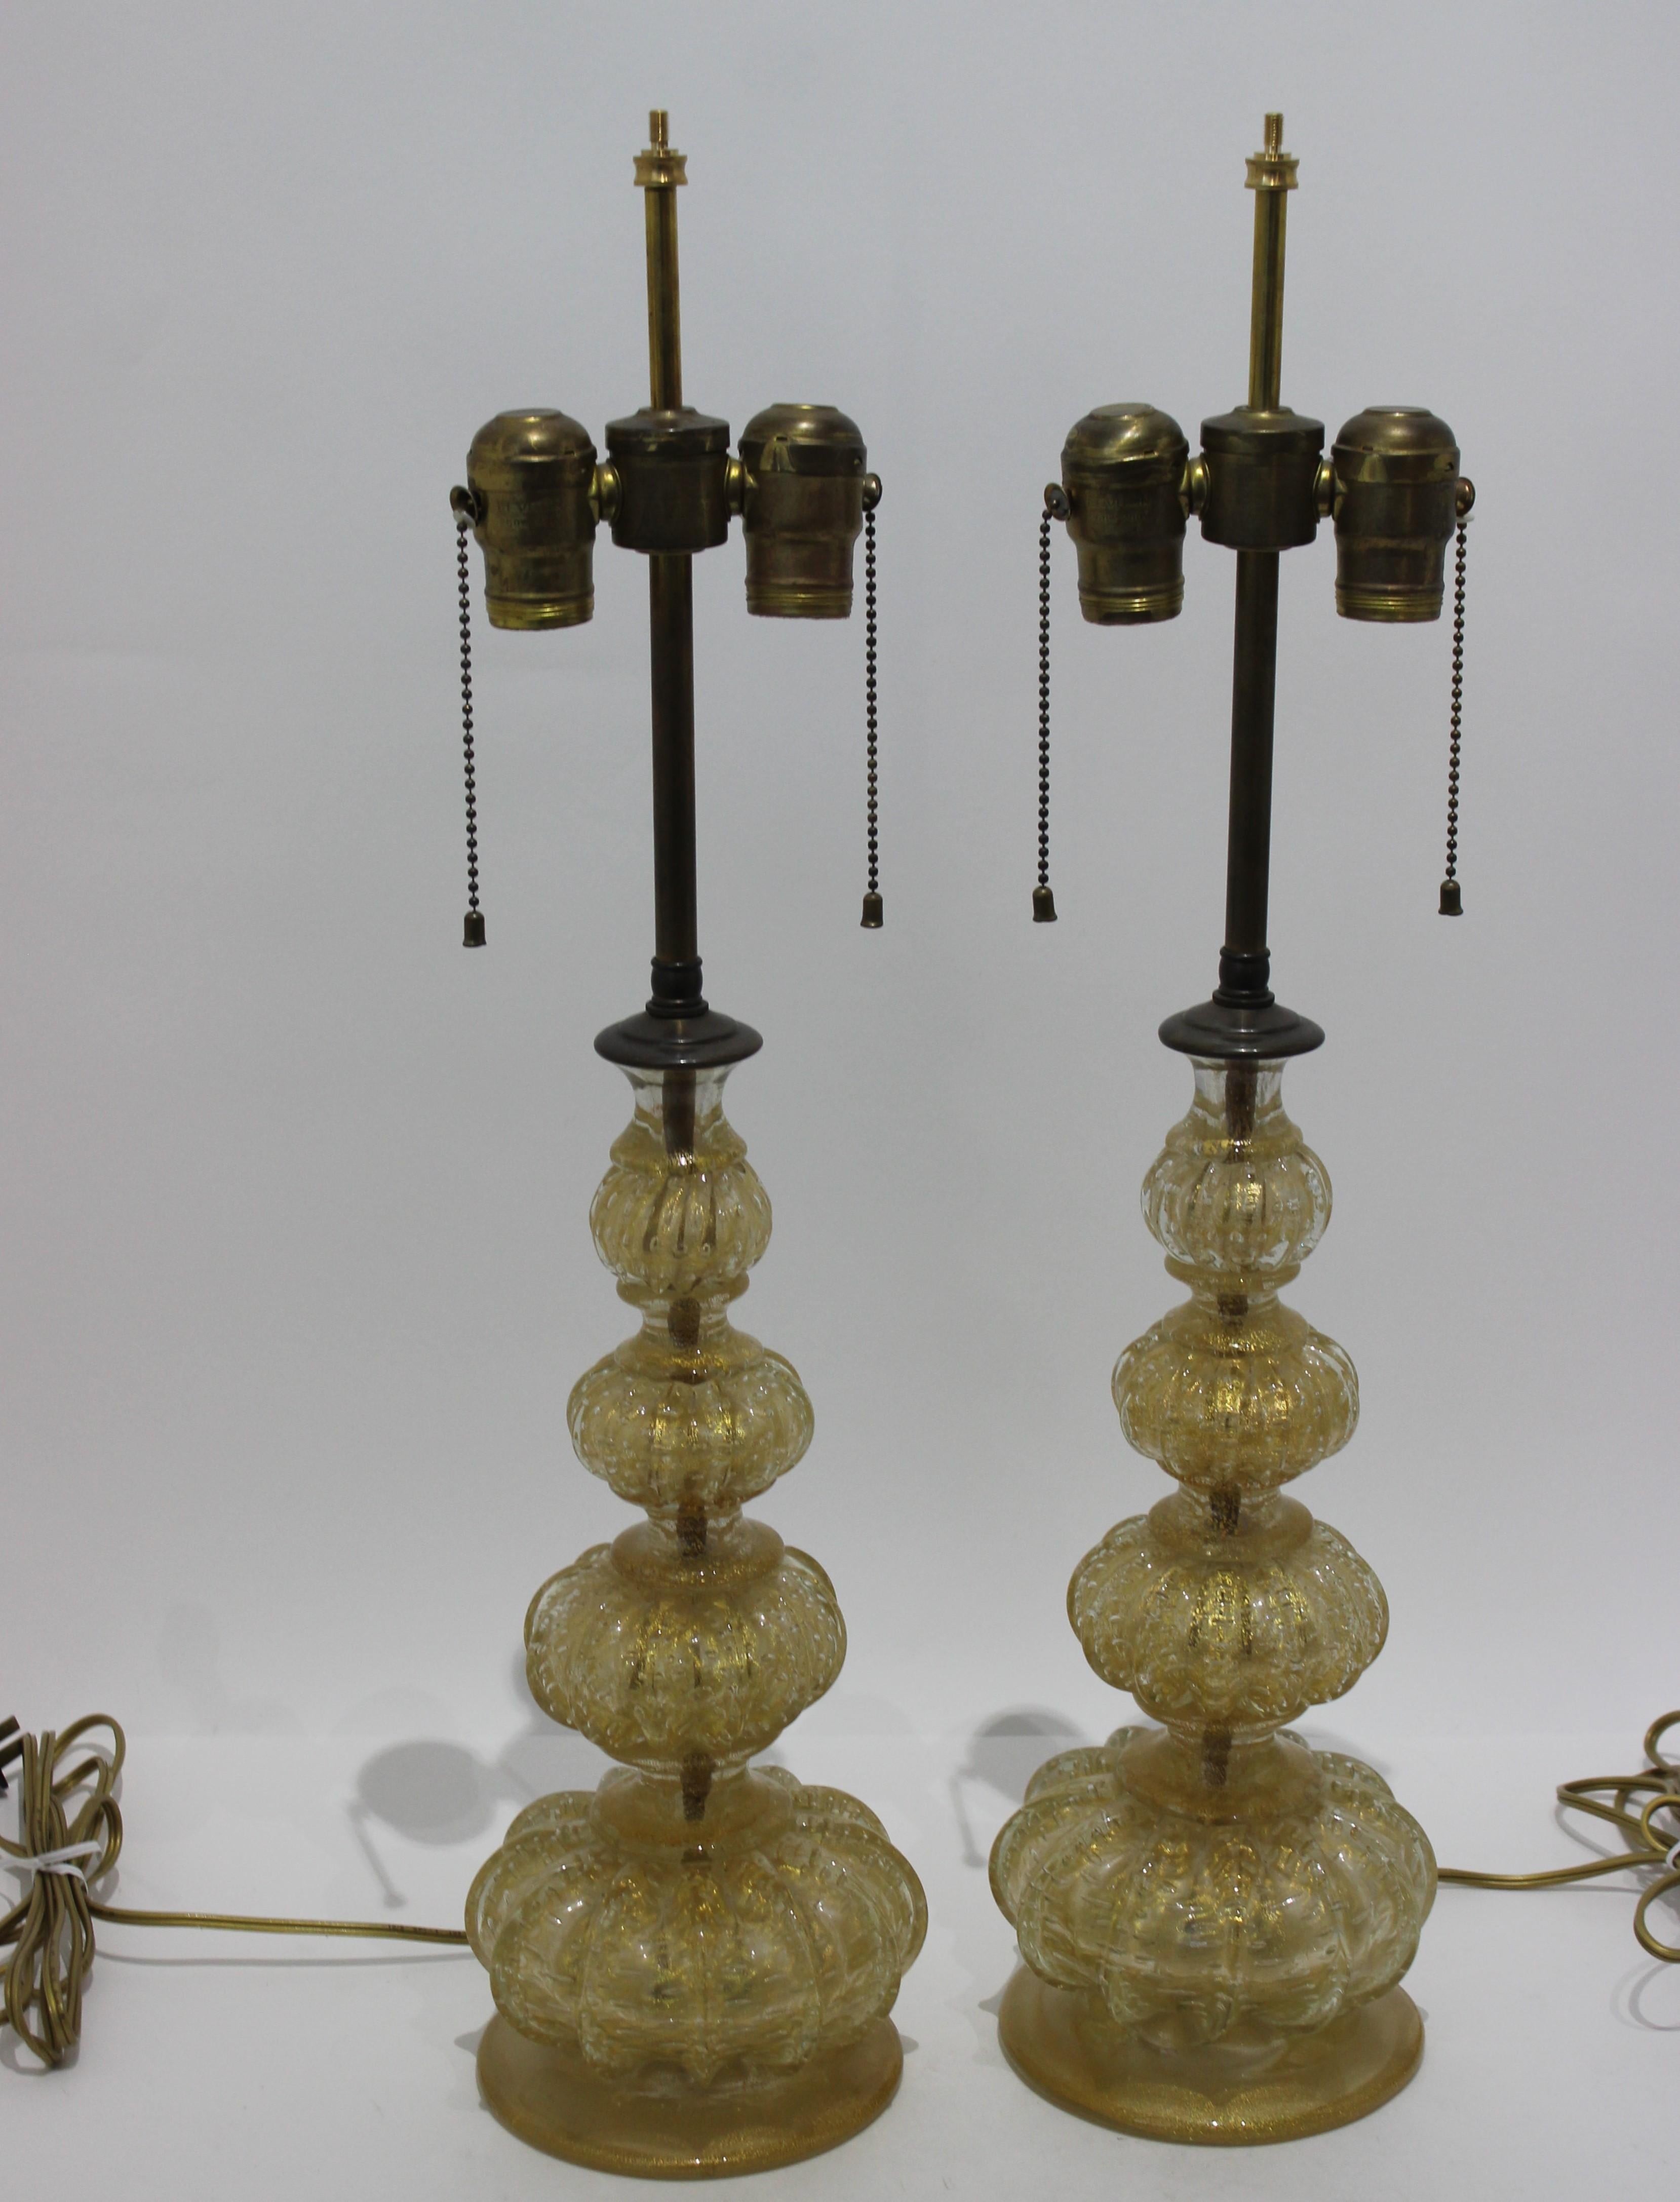 This stylish and chic pair of 1920s Barovier et Toso Murano glasss table lamps will make a definite statement with the use of material, technique and form.

Note: They have been professionally rewired.